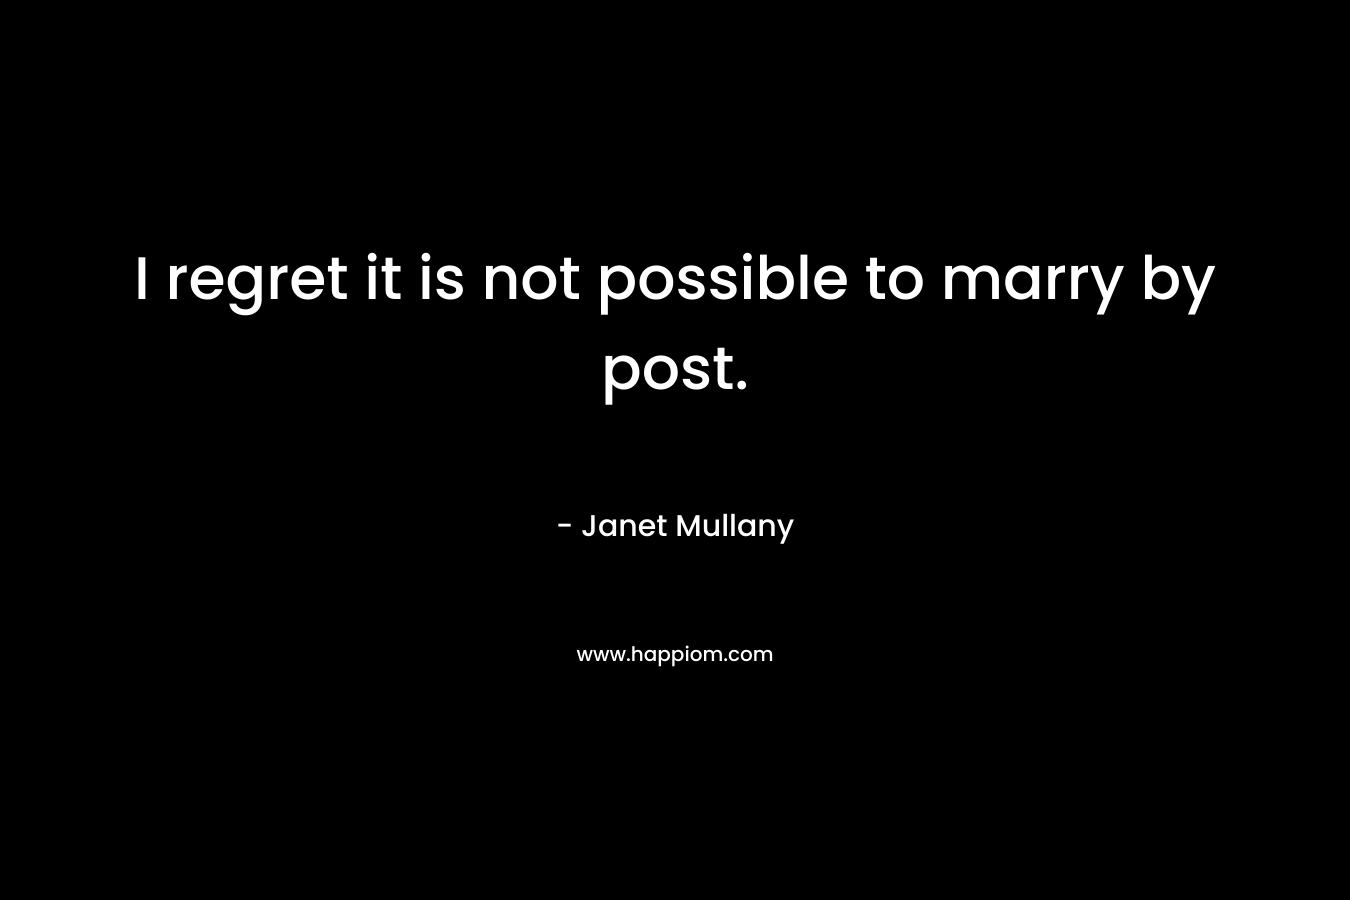 I regret it is not possible to marry by post. – Janet Mullany